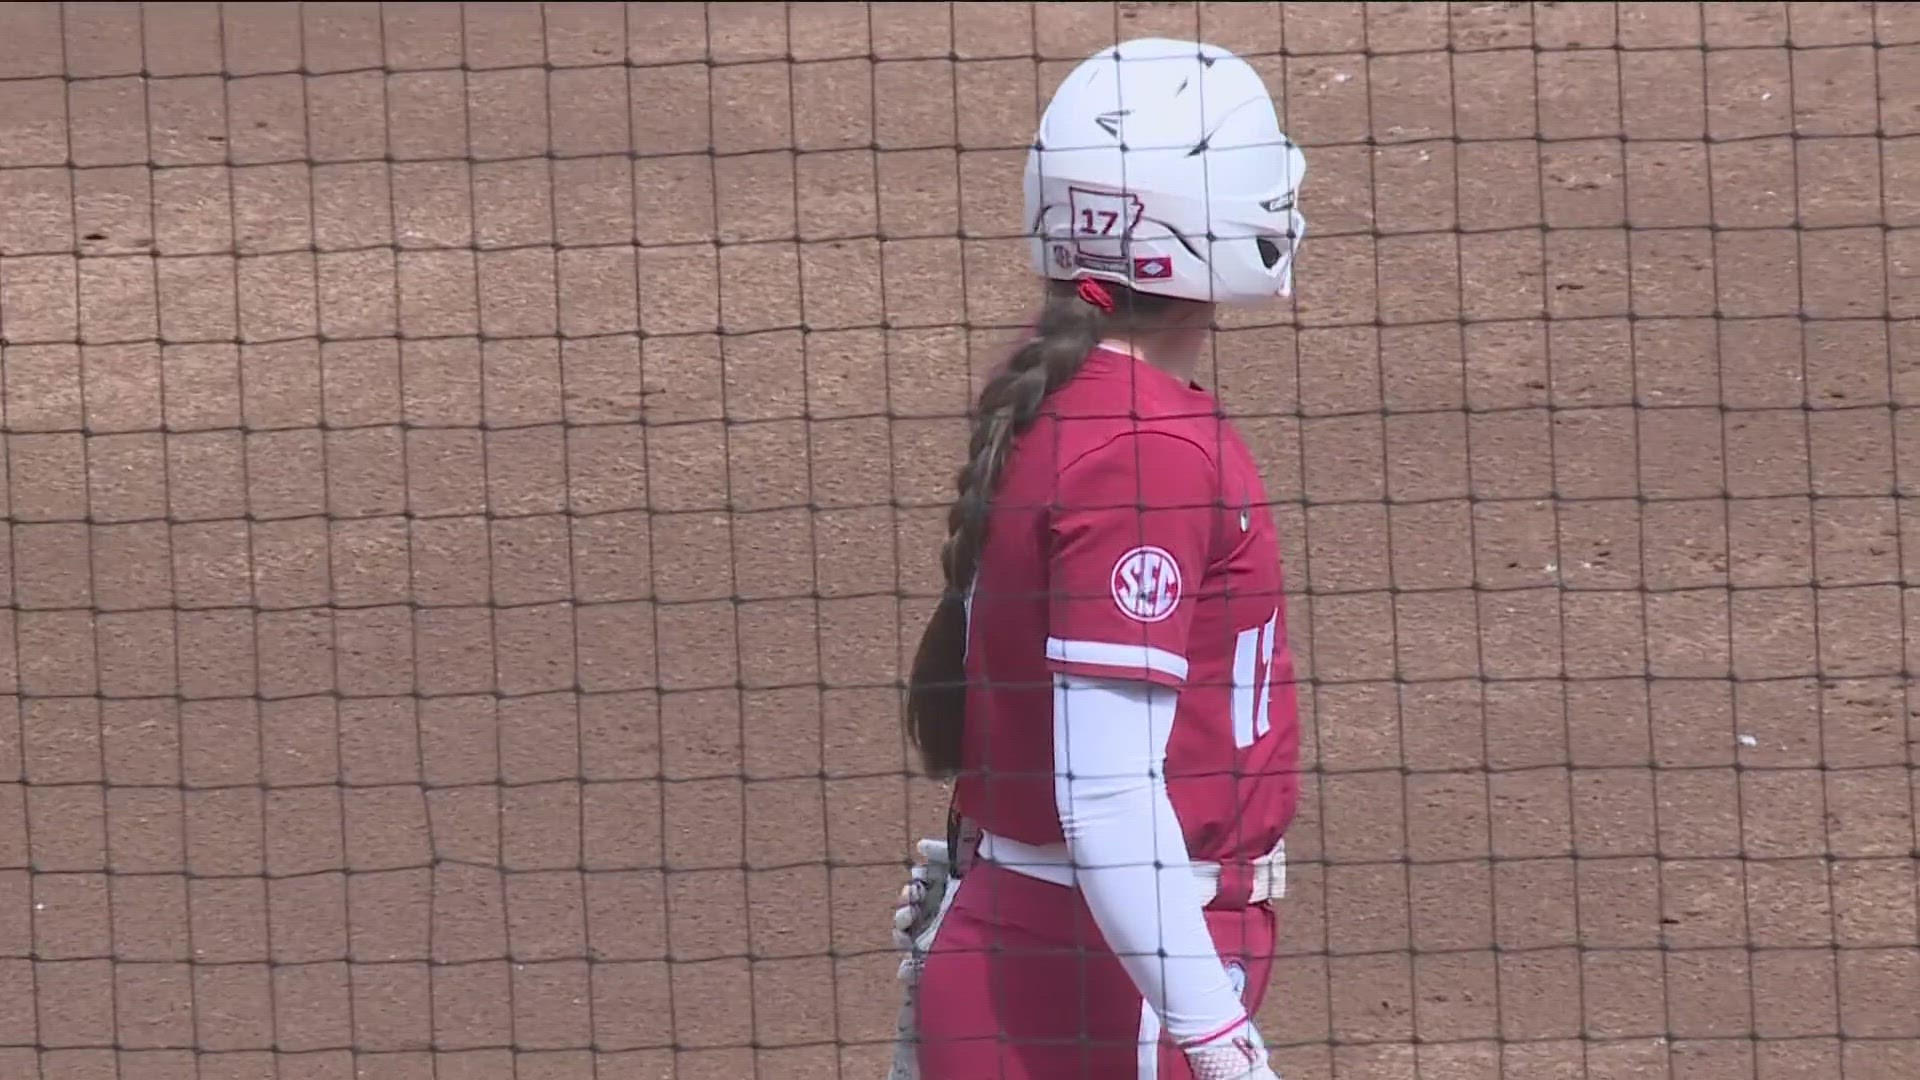 Freshman catcher Kennedy Miller is making her presence felt in front of and behind the plate early in her career with the Hogs.